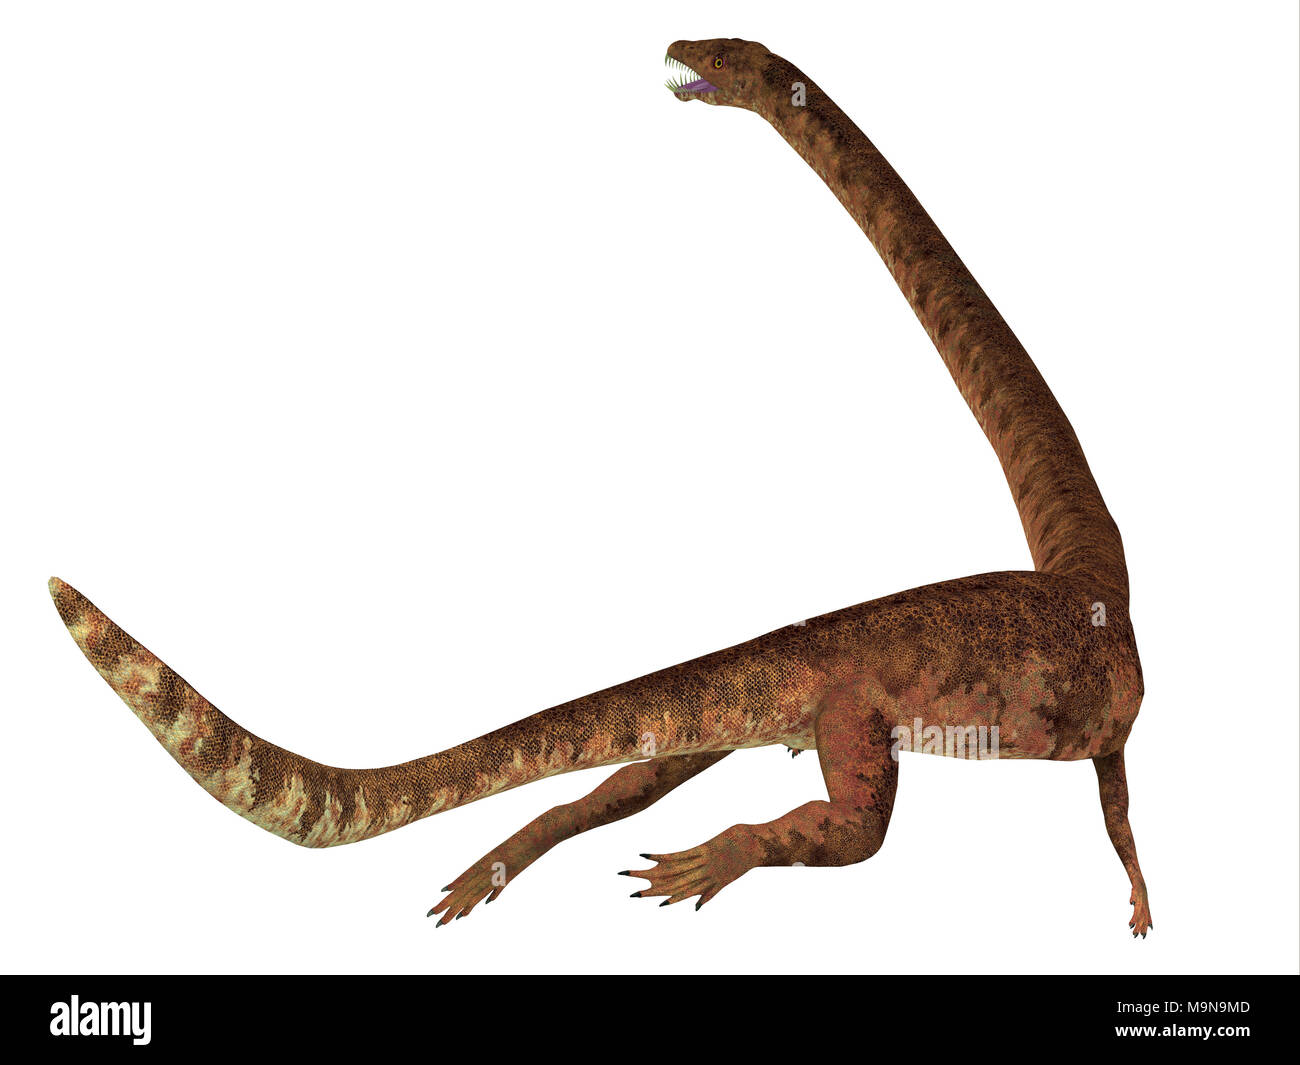 Tanystropheus Dinosaur Tail - Tanystropheus was a marine predatory reptile that lived in the Triassic Seas of Europe and the Middle East. Stock Photo